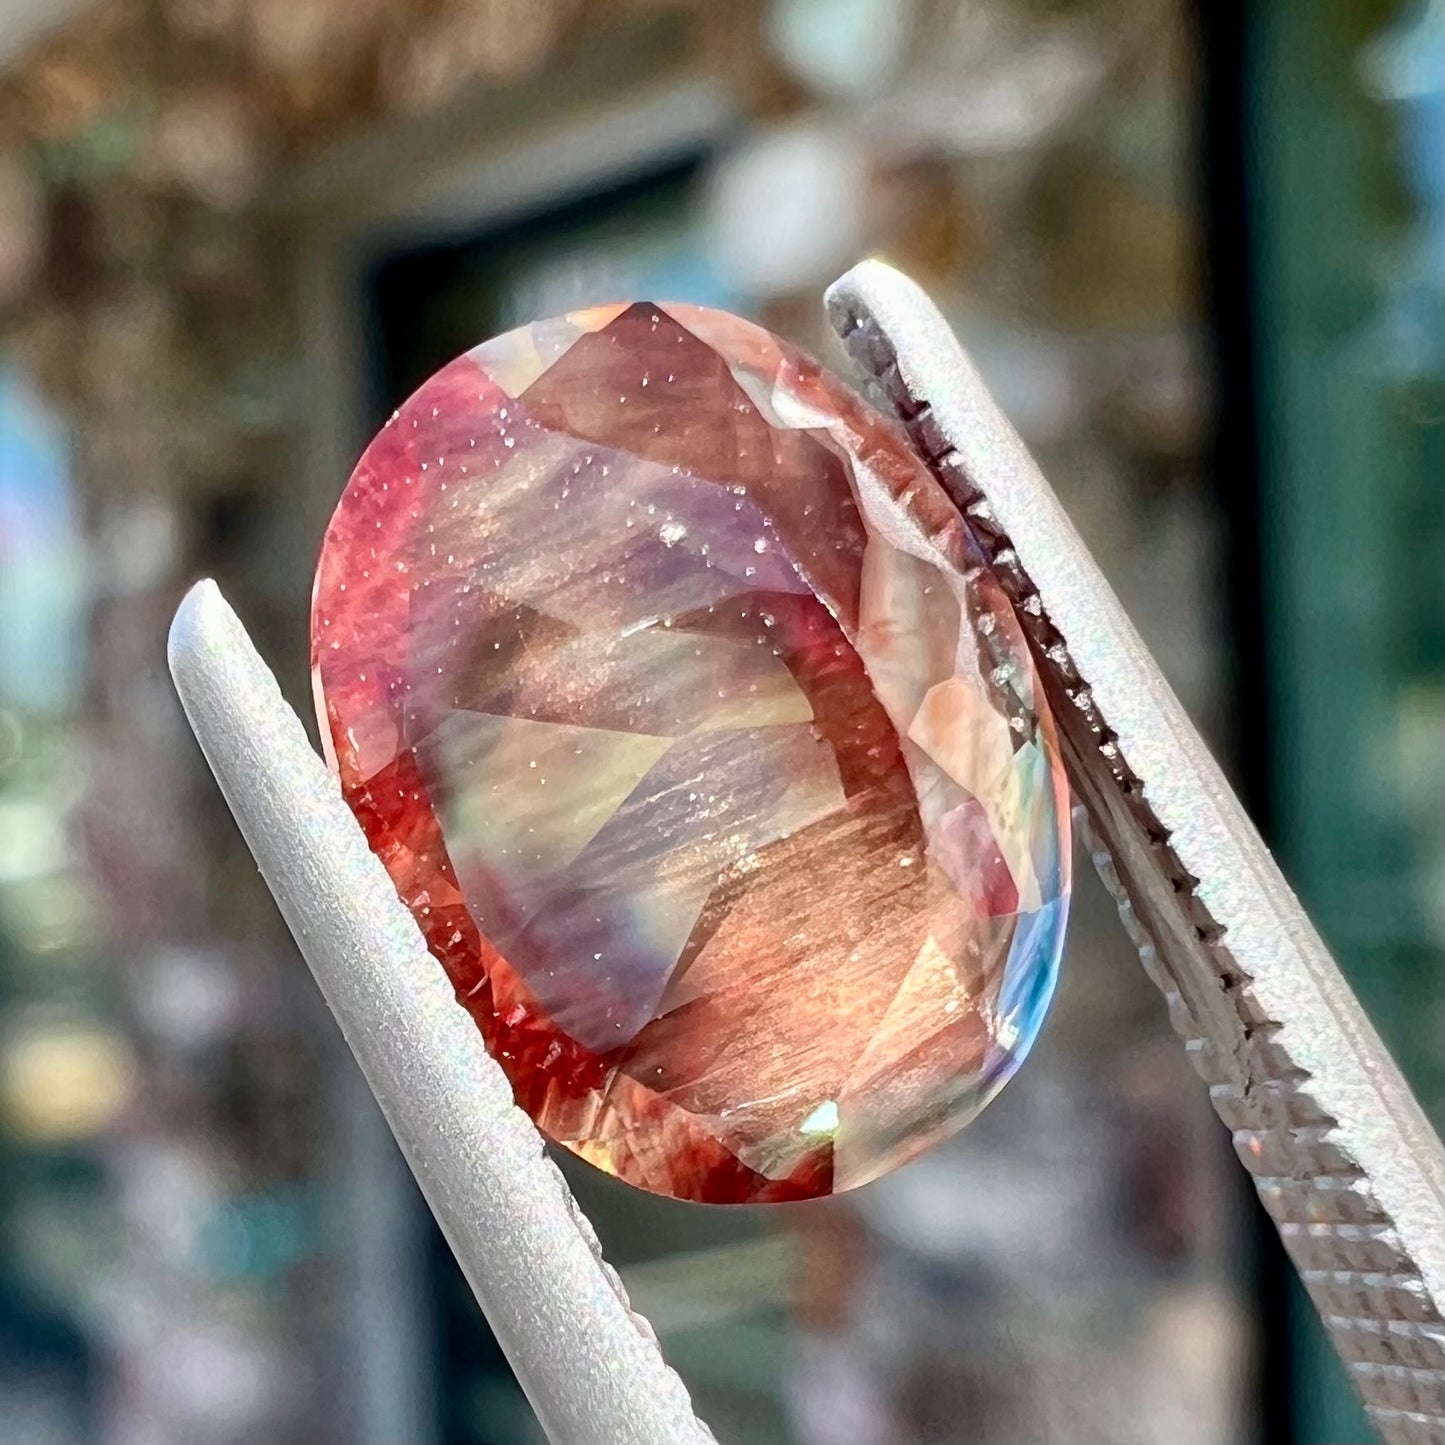 A loose, oval cut oregon sunstone.  The gem is reddish orange with a green secondary color.